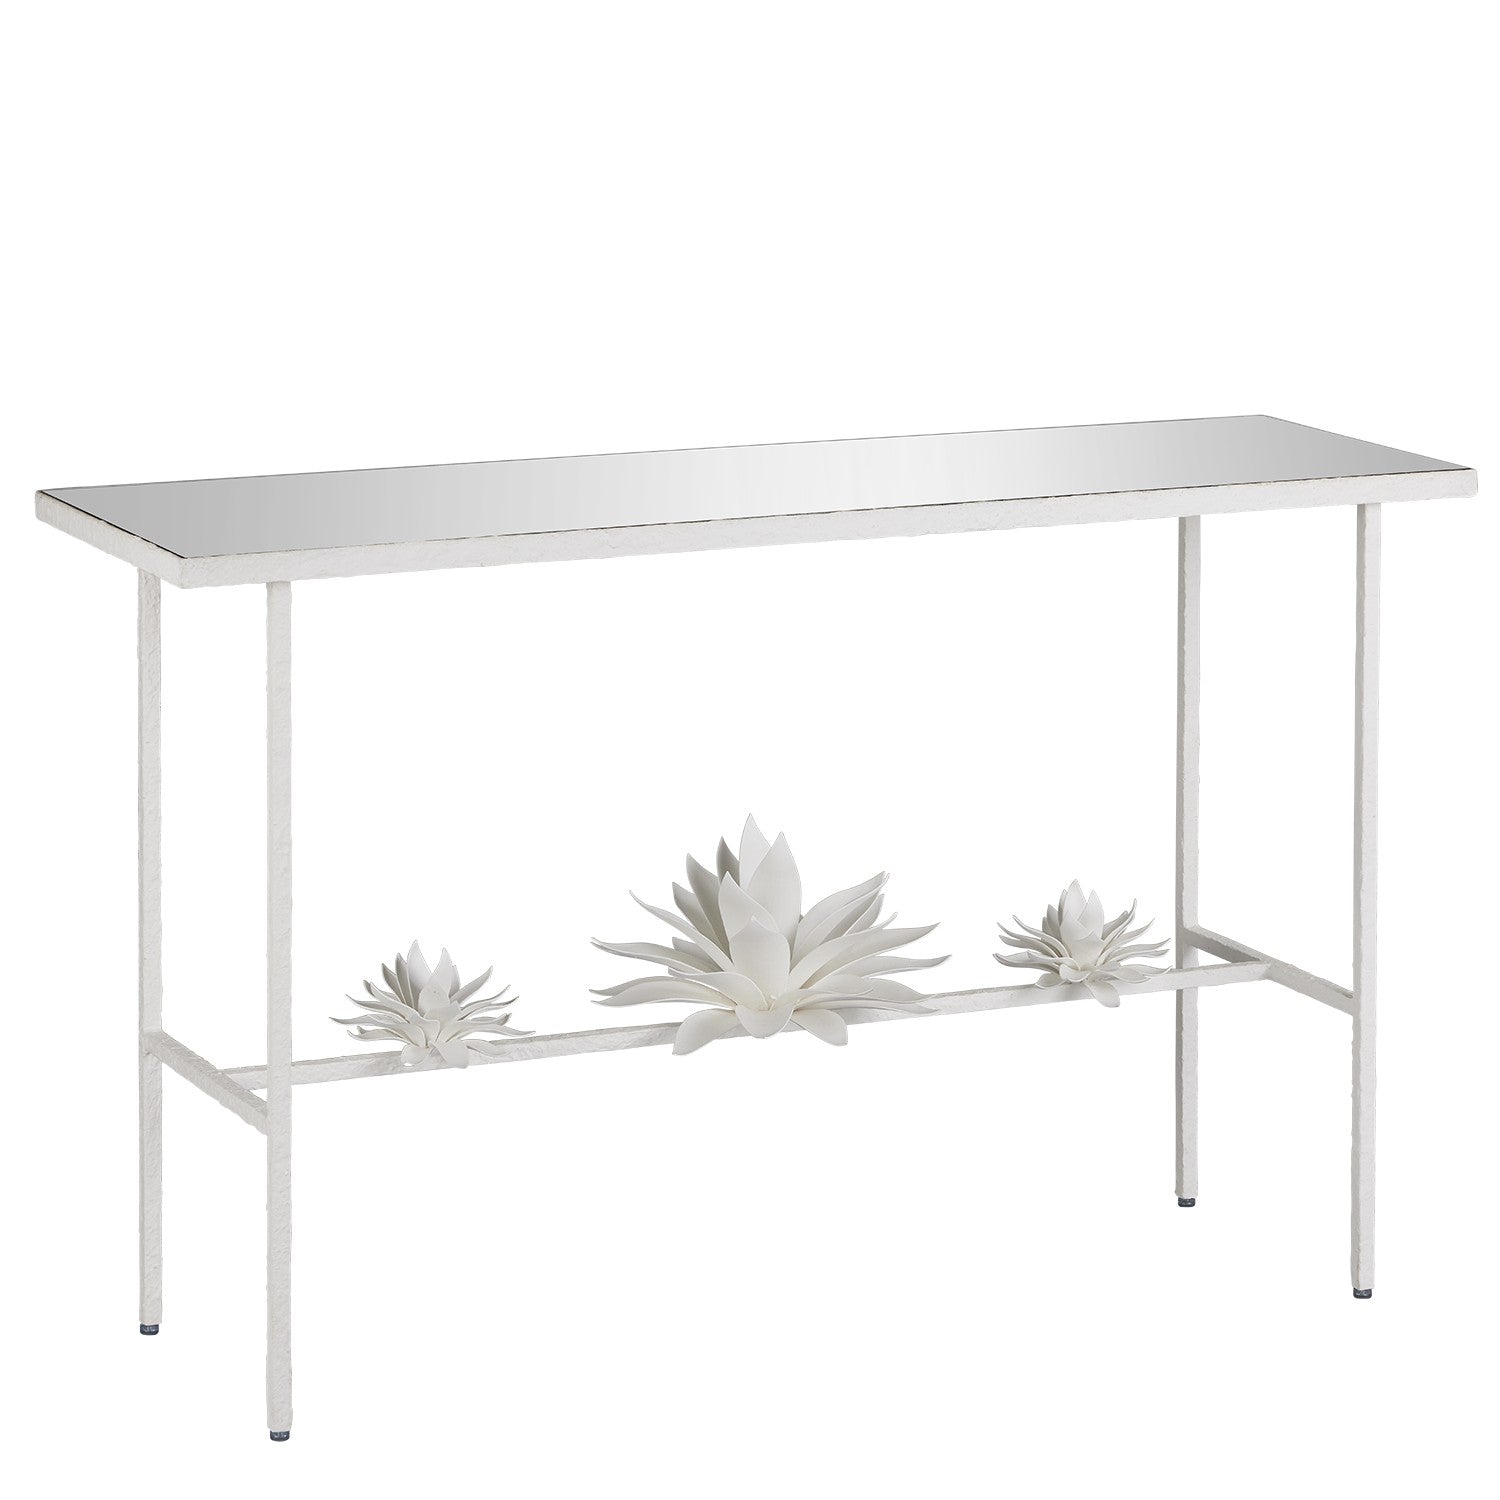 Currey and Company - Console Table - Marjorie Skouras - Yeso Blanco/Mirror- Union Lighting Luminaires Decor